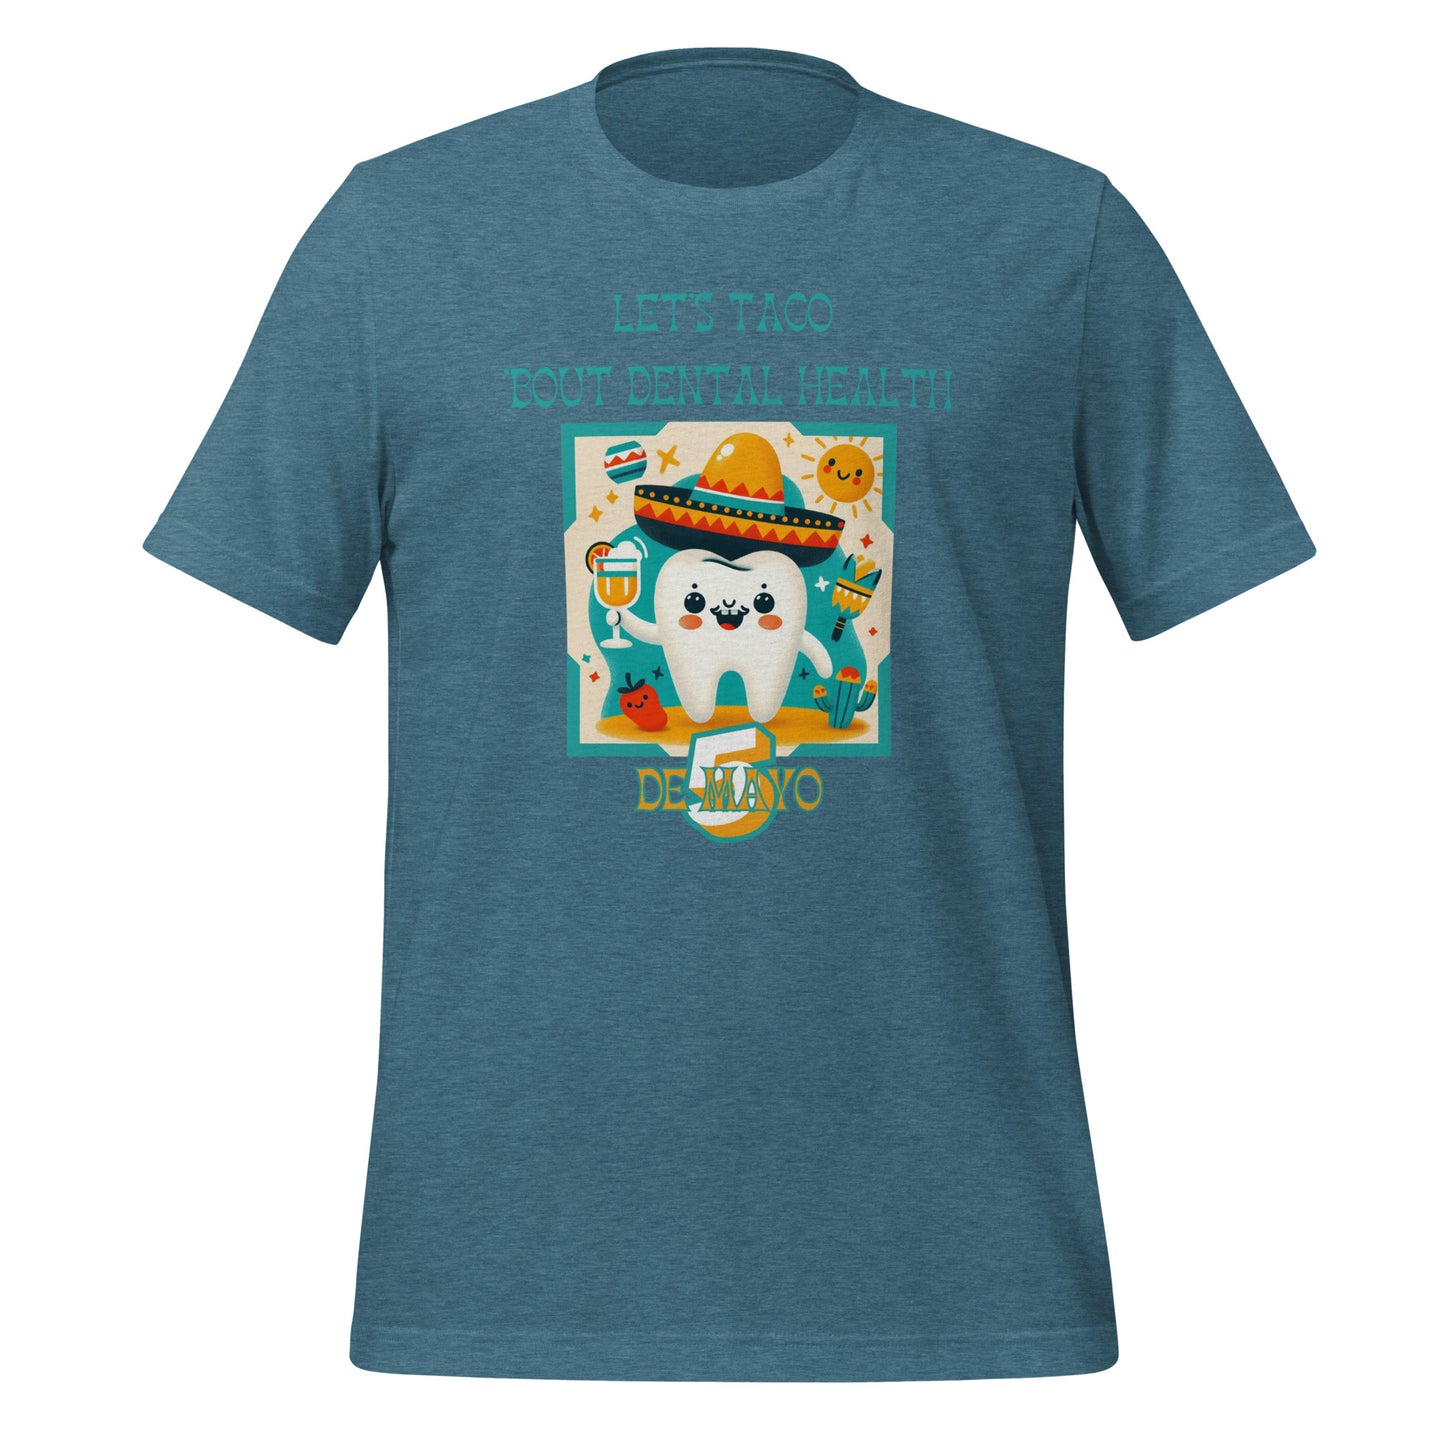 Celebrate Cinco de Mayo with a Smile: Funny Dental T-Shirts for Dentists, Hygienists & Assistants